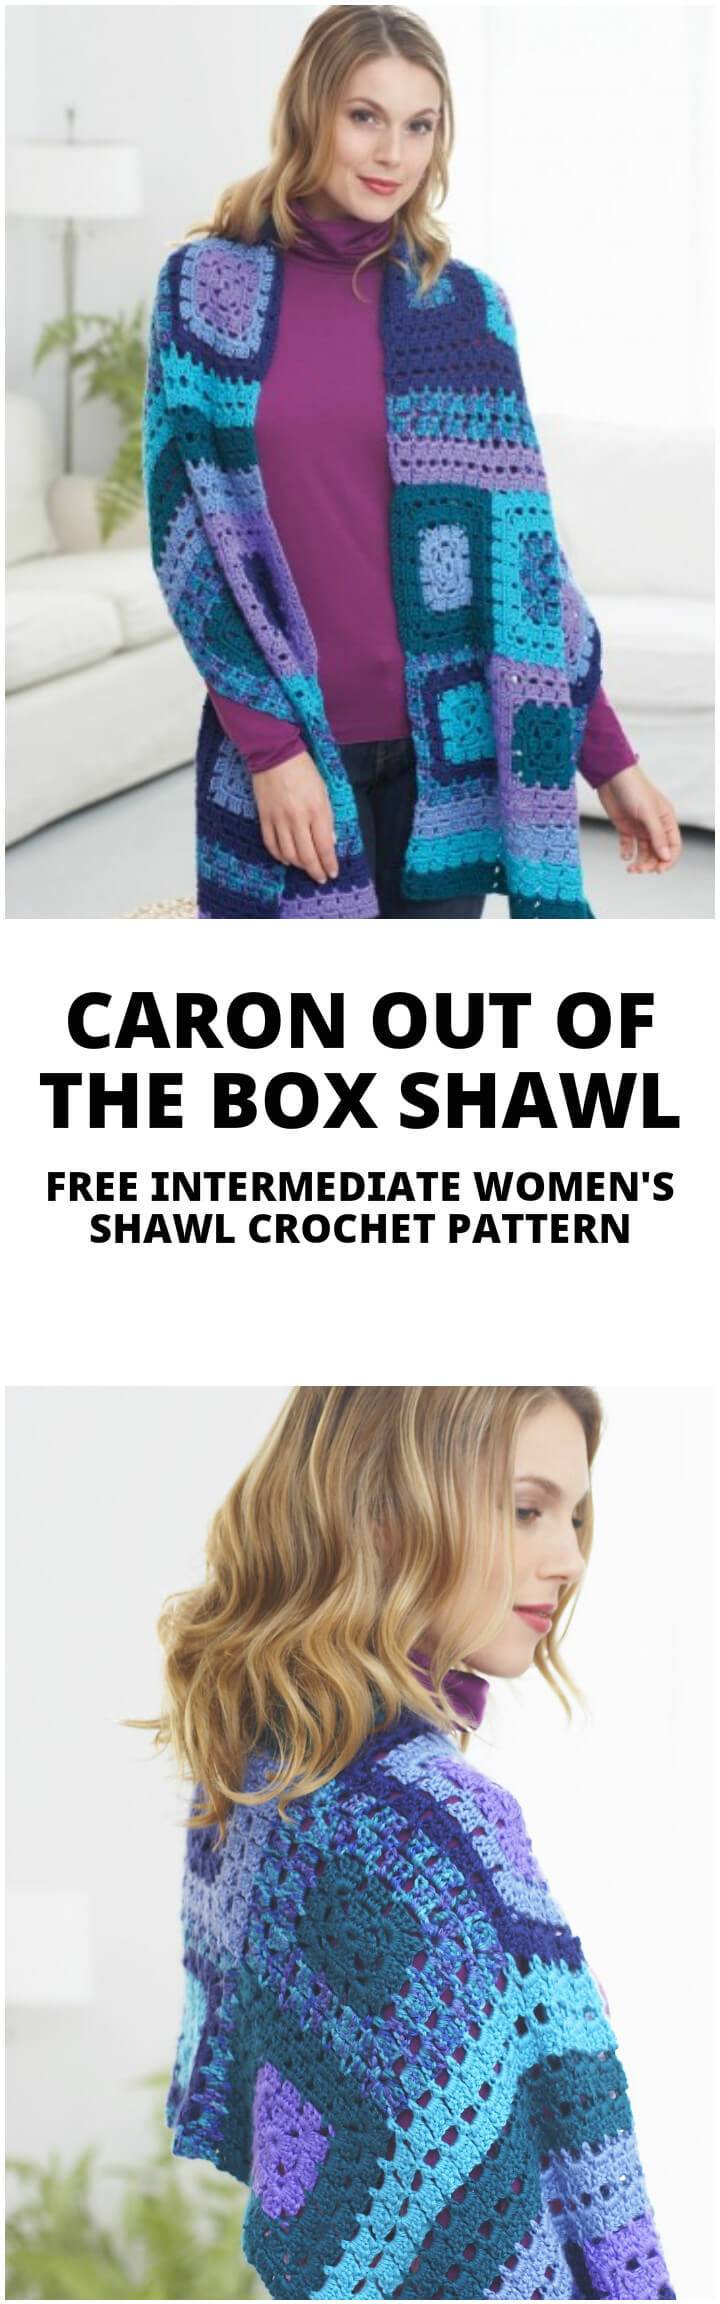 crochet caron out of the box shawl